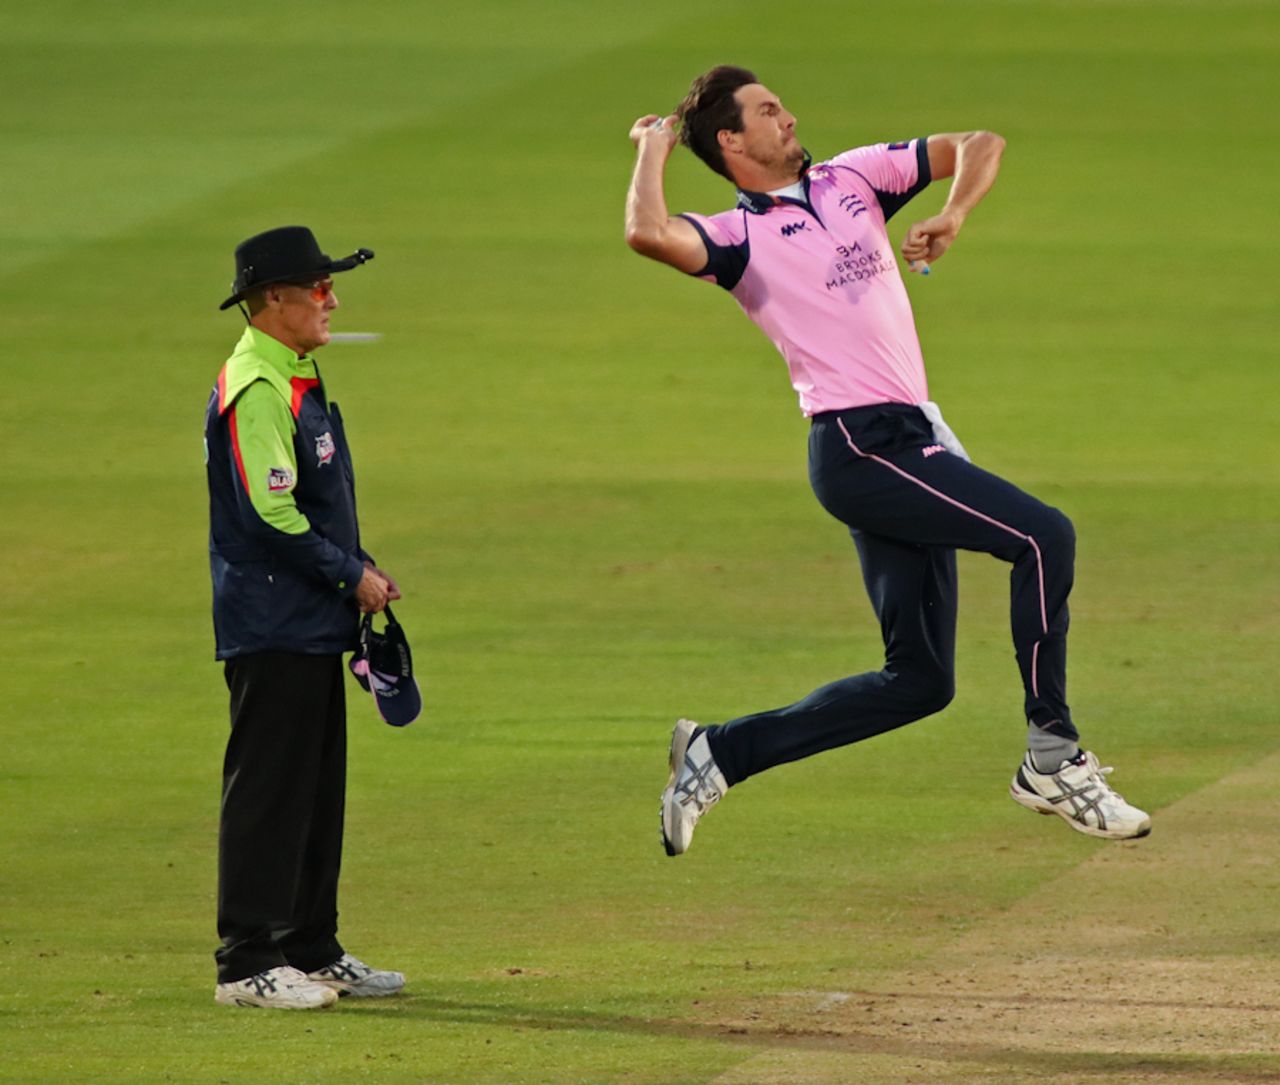 Steve Finn in action for Middlesex, Middlesex v Essex, NatWest Blast South Group, Lord's, July 28, 2016